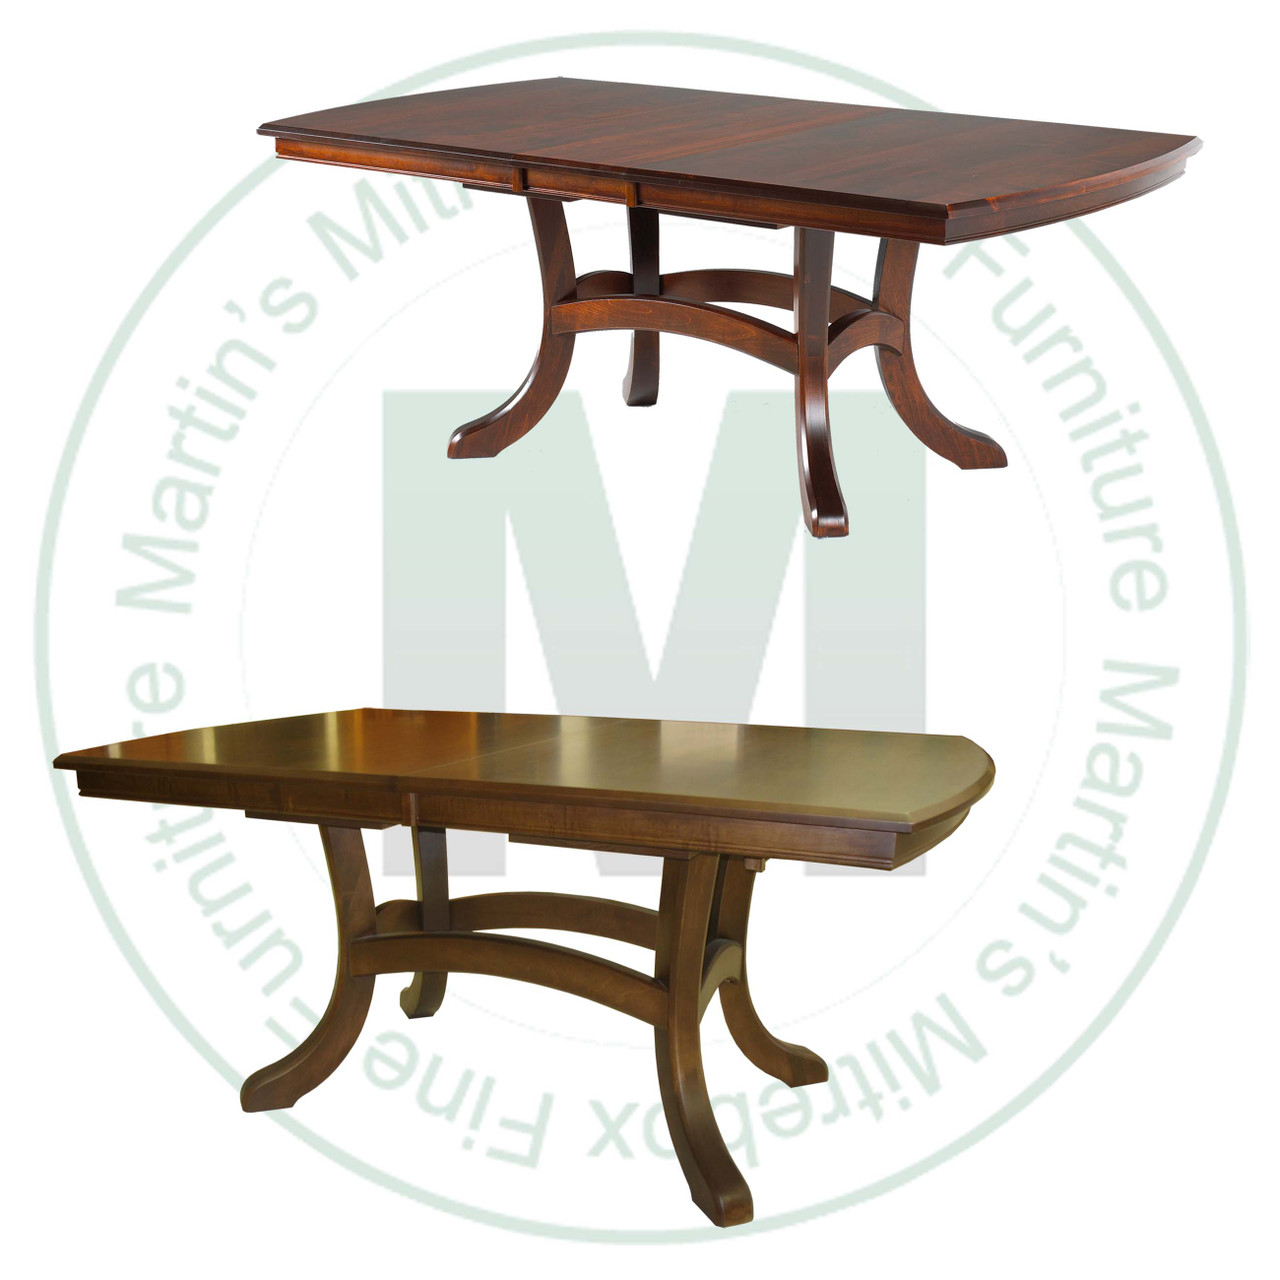 Oak Jordan Double Pedestal Table 48''D x 96''W x 30''H With 4 - 12'' Leaves. Table Has 1'' Thick Top